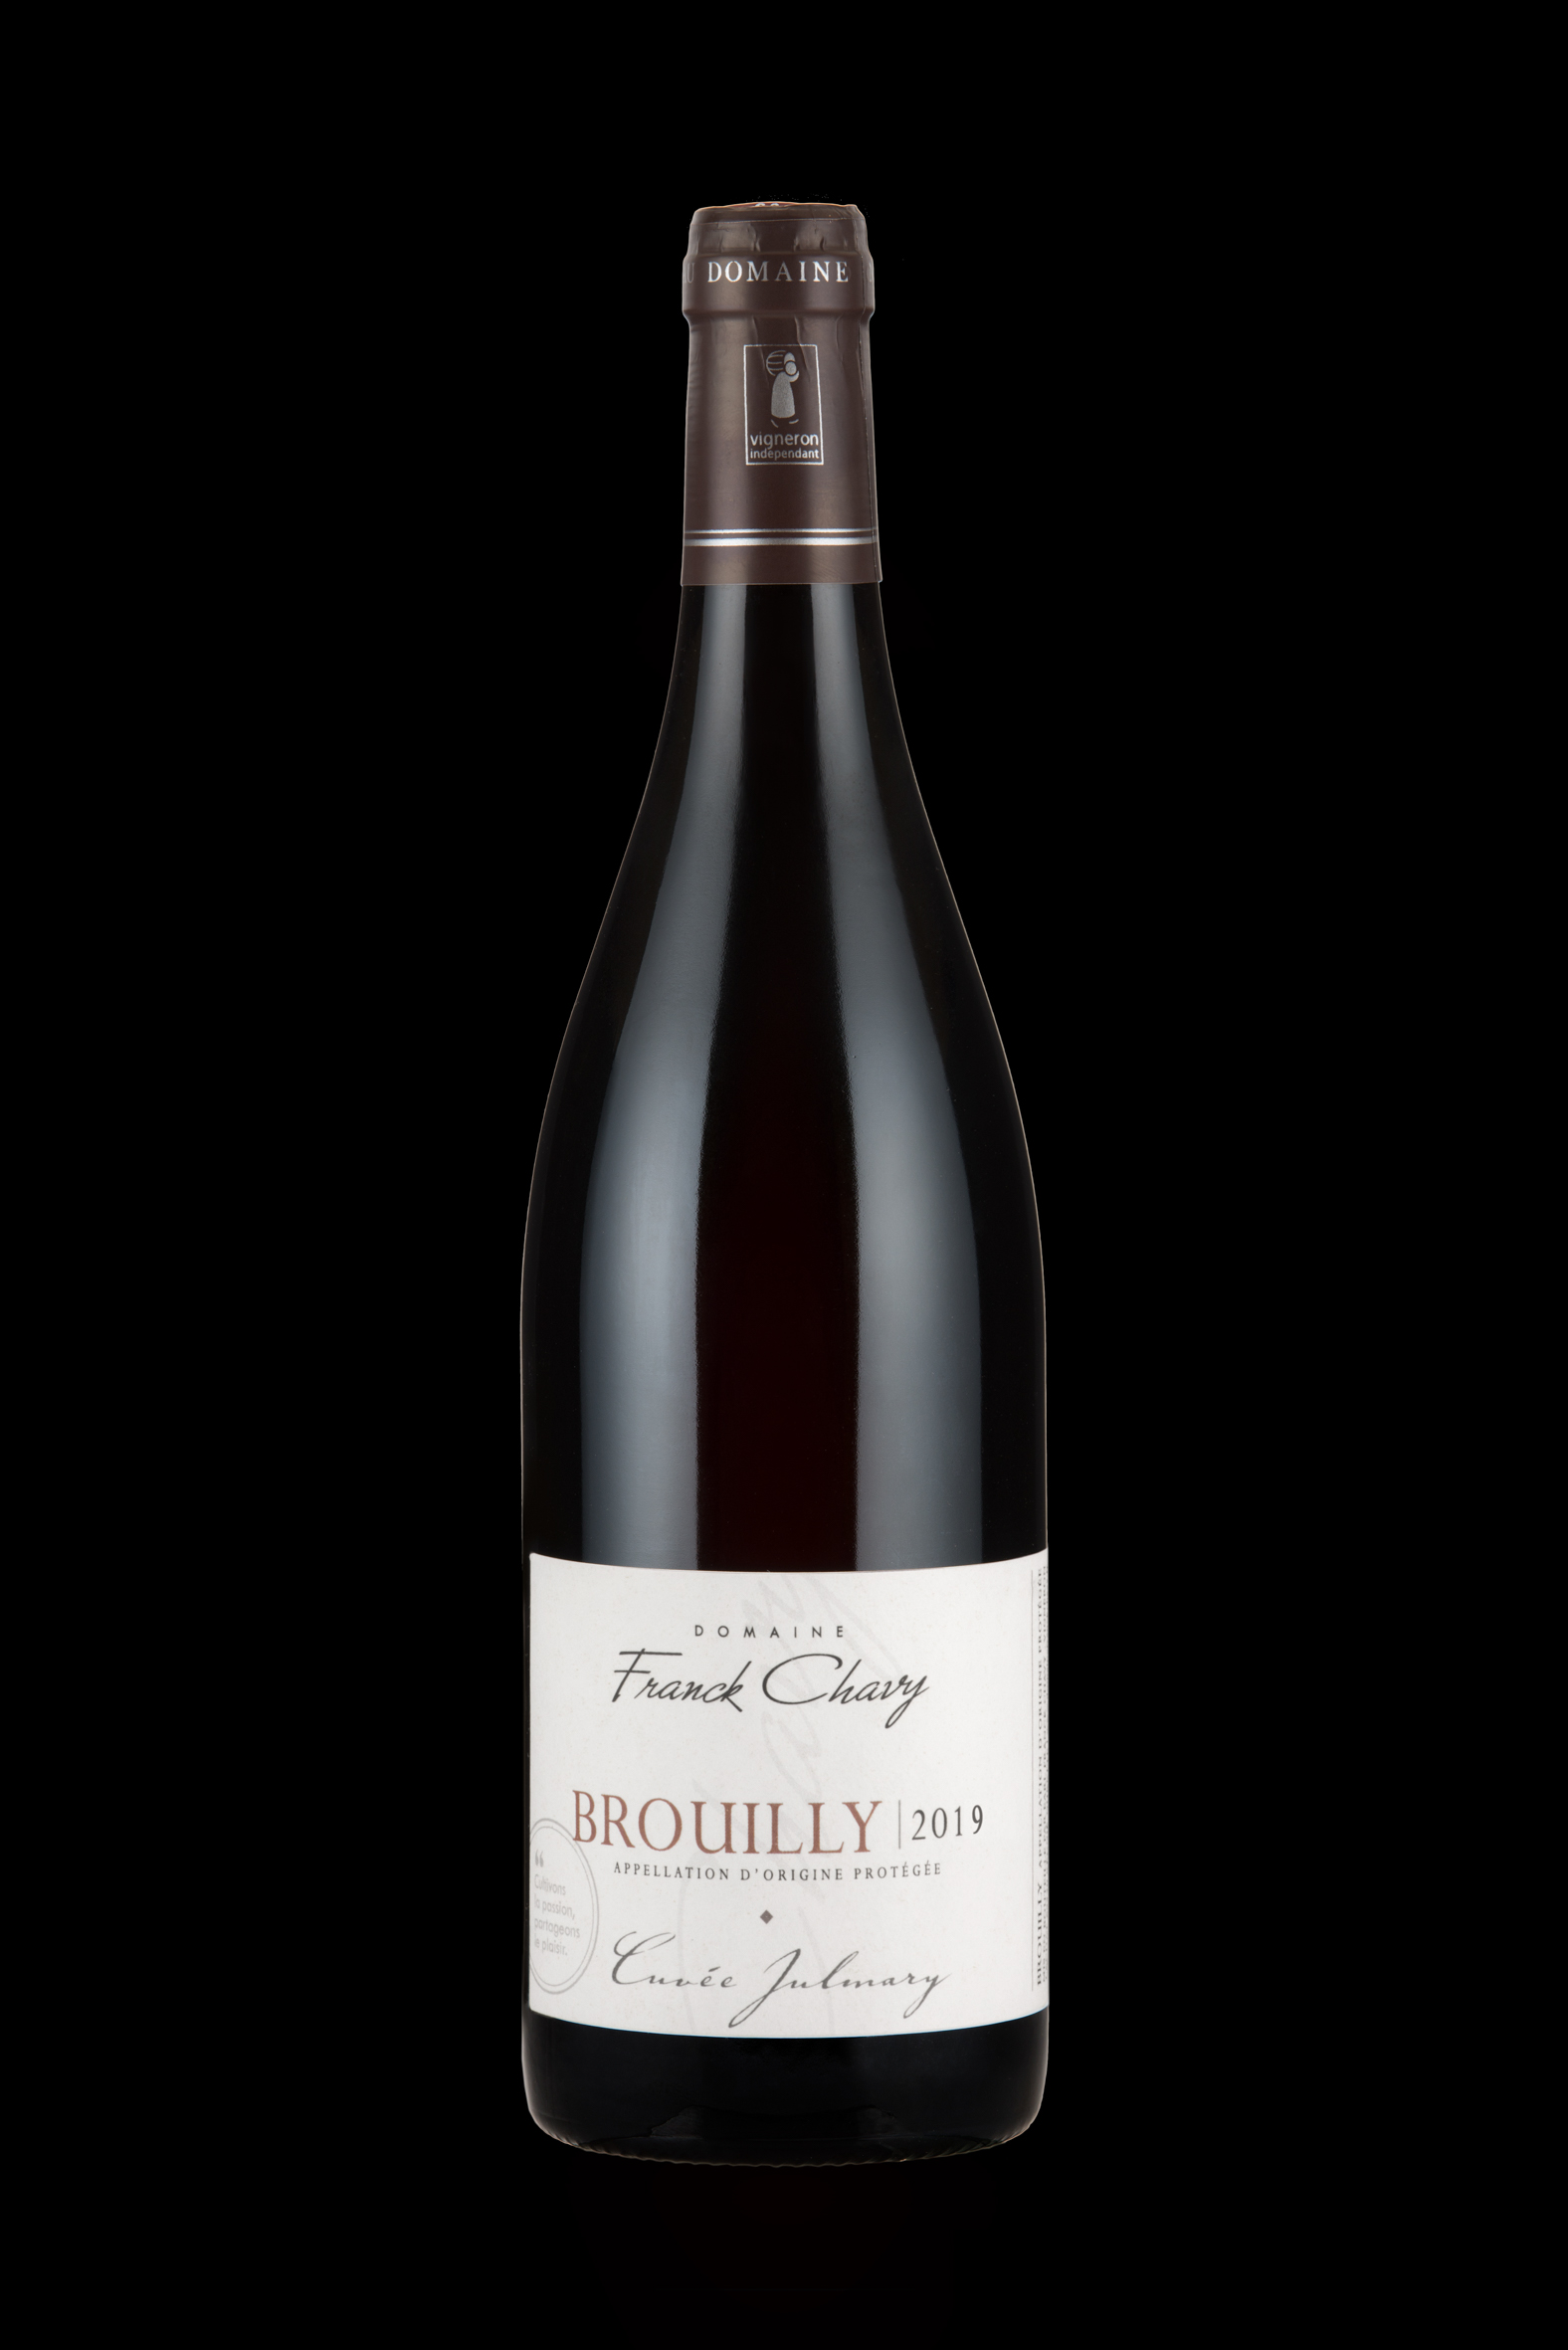 Brouilly Julmary 2019